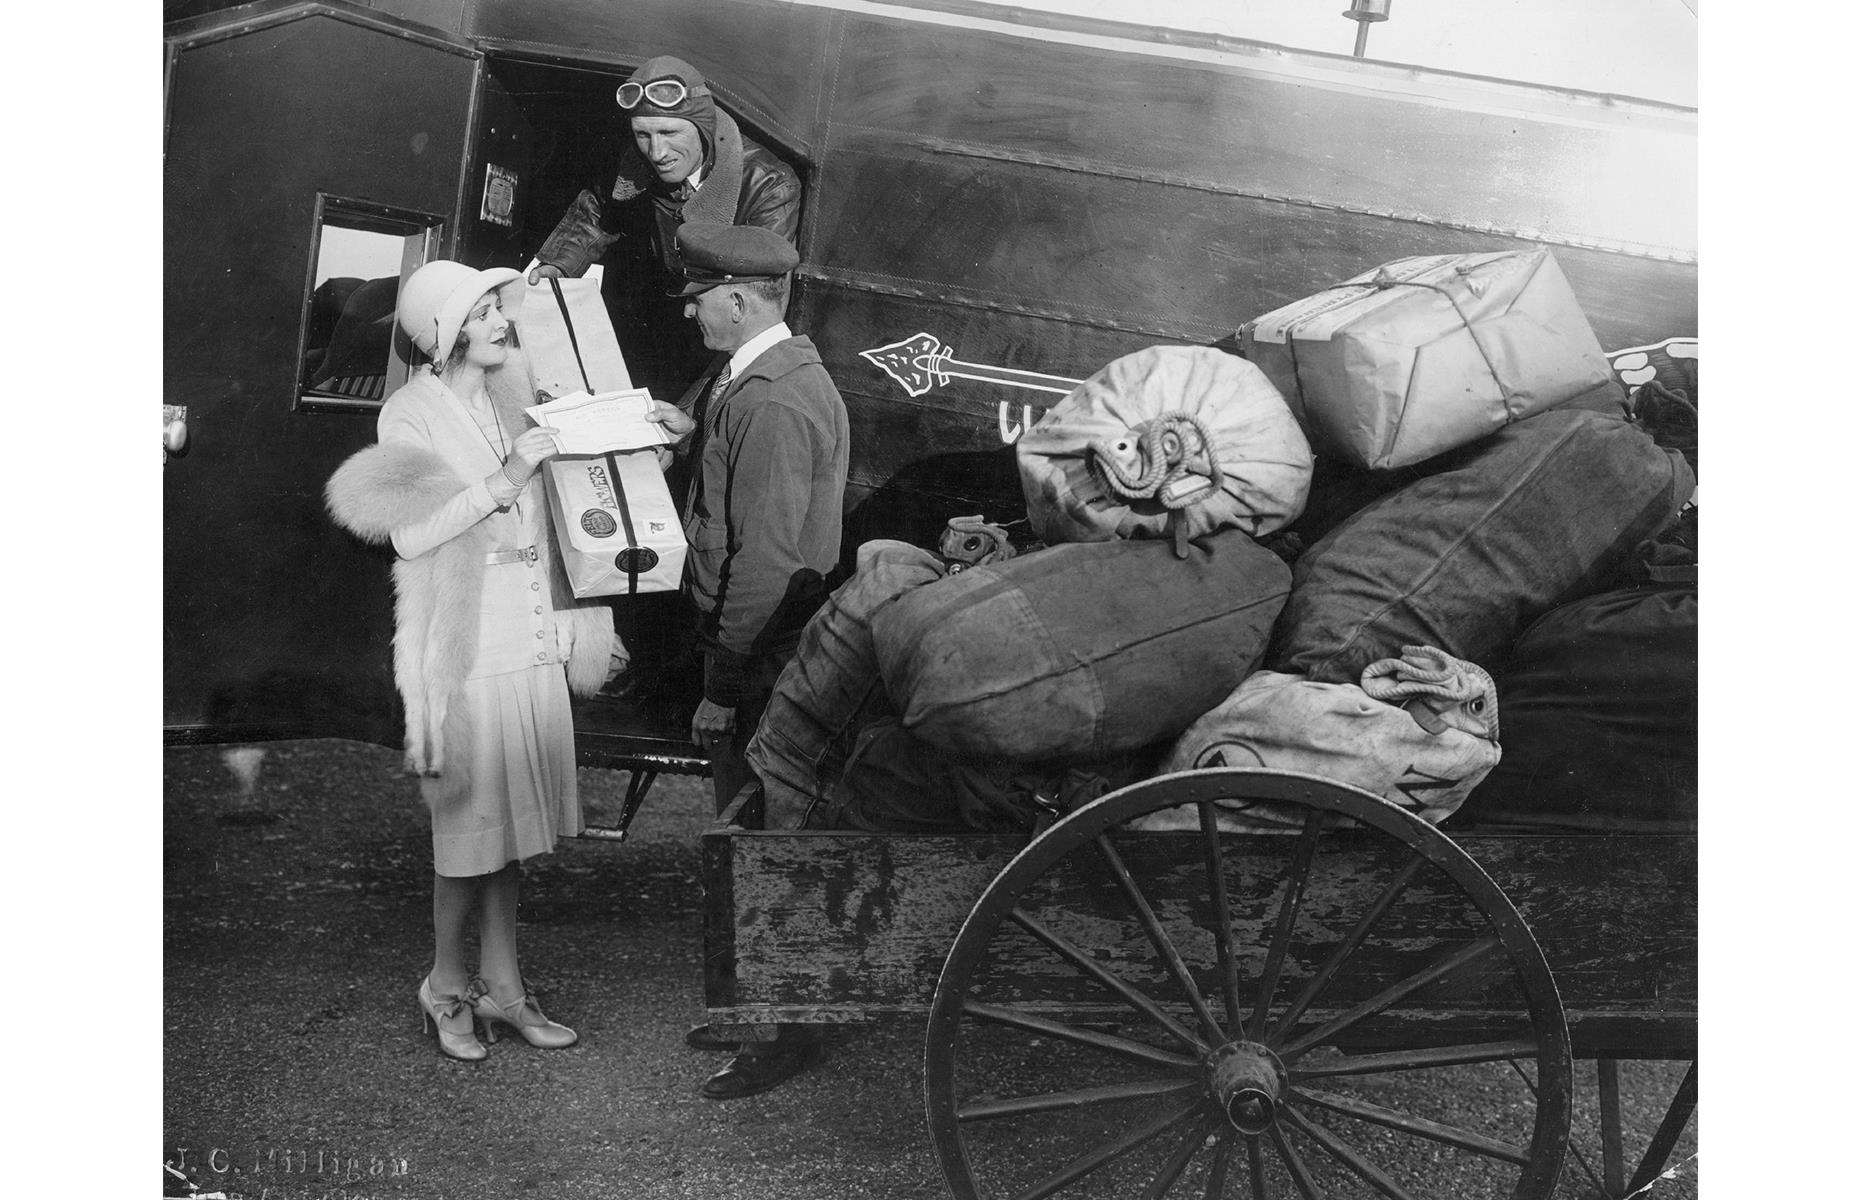 <p>The early 1930s continued in a similar fashion to the 1920s, with airlines offering airmail delivery services and also carrying passengers. Flying was still extremely expensive and fairly uncomfortable but, <a href="https://airandspace.si.edu/exhibitions/america-by-air/online/innovation/innovation15.cfm">according to the Smithsonian National Air and Space Museum</a>, the number of airline passengers grew from 6,000 in 1930 to 450,000 in 1934. Here, a woman passes on her mail to the crew of a Fokker F.10 monoplane operated by Western Air Express.</p>